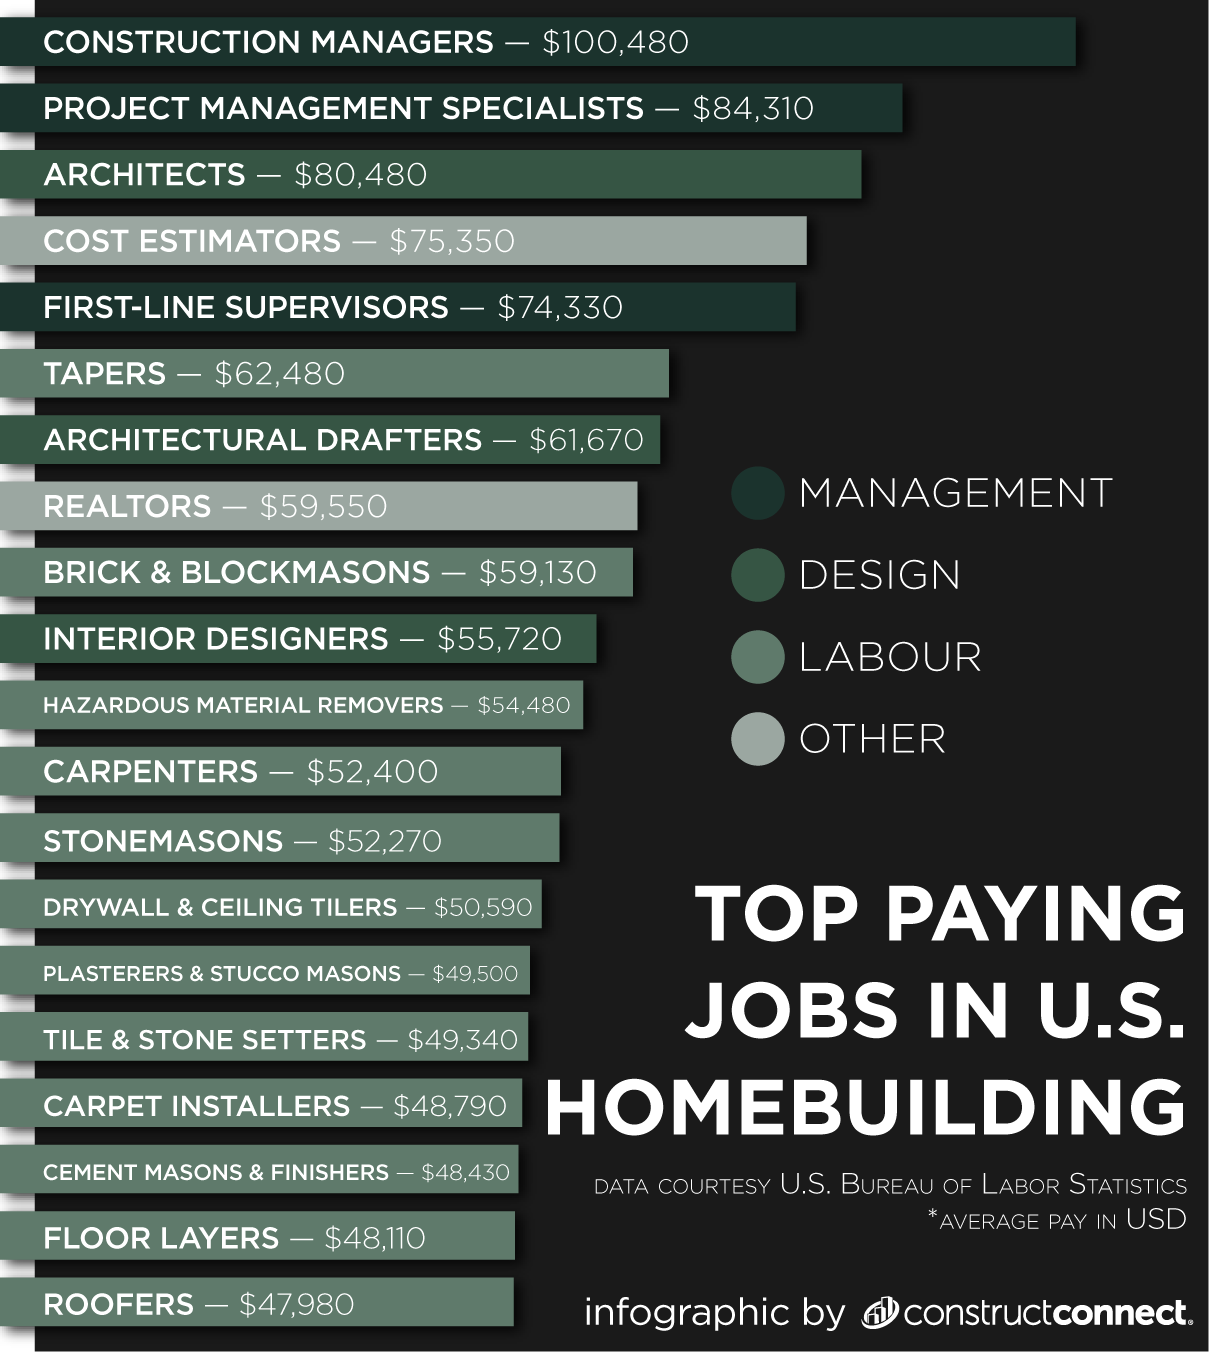 Top 20 Best Paying U.S. Homebuilding Jobs infographic